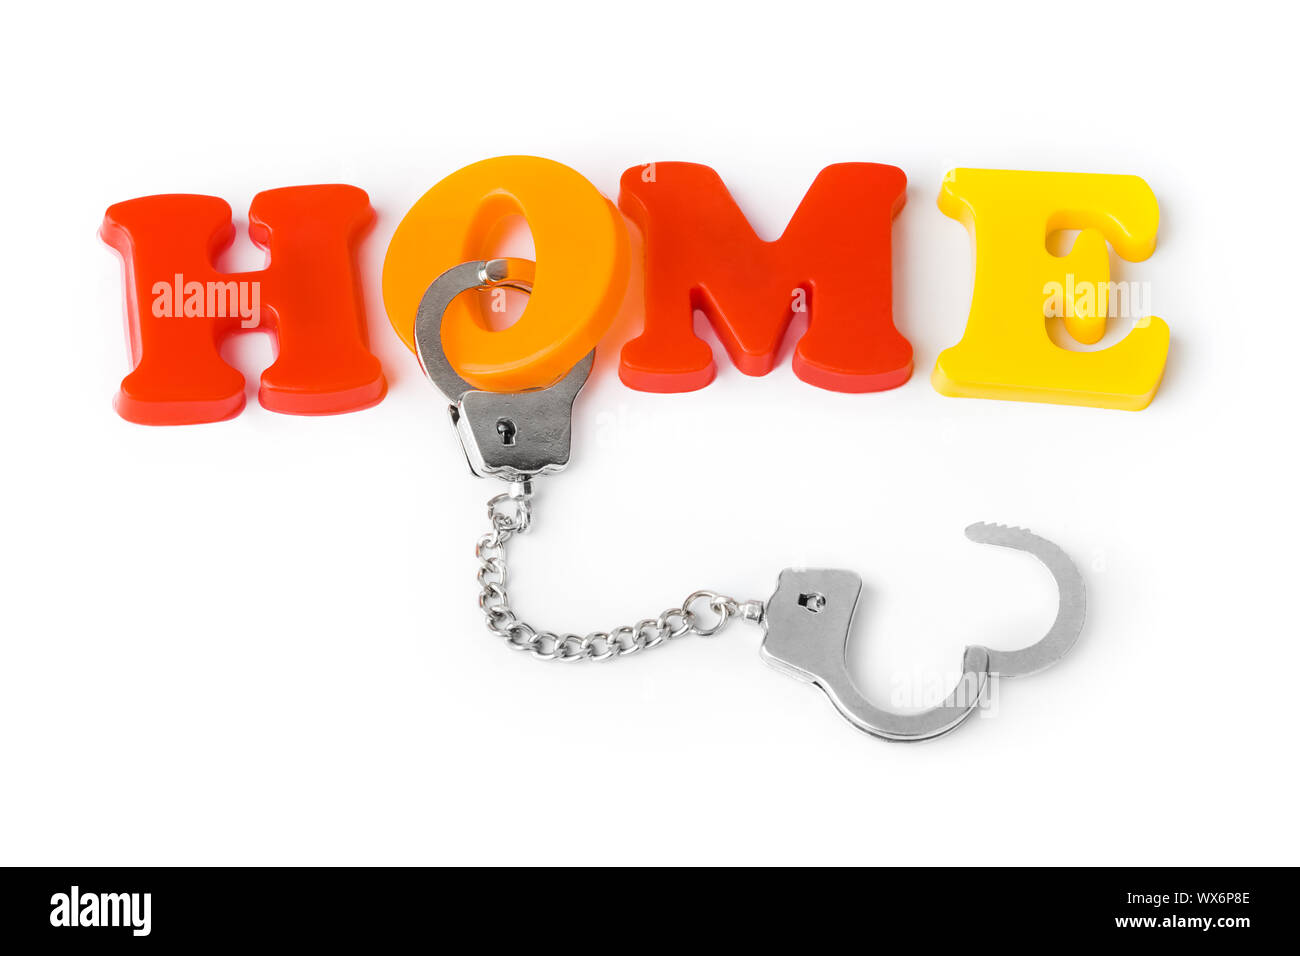 Home and handcuffs Stock Photo